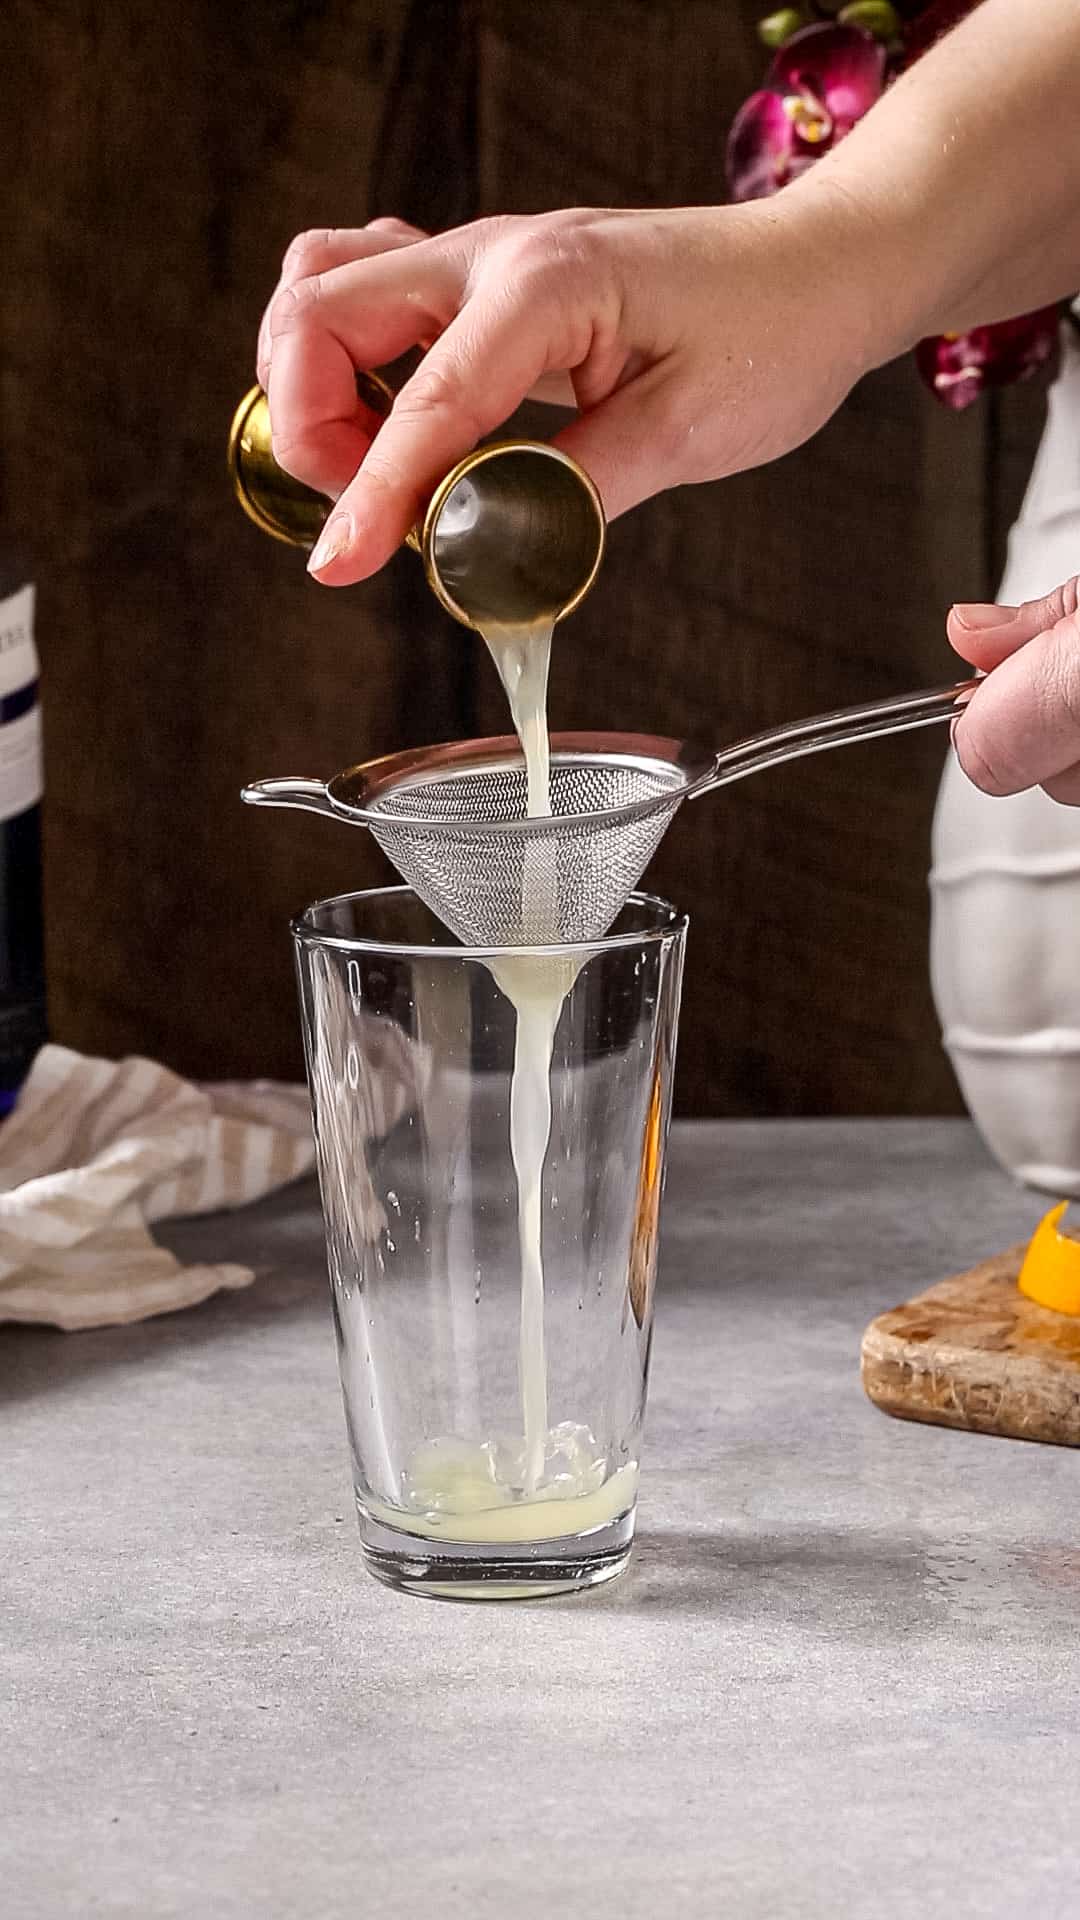 Lemon juice being added to a cocktail shaker glass.